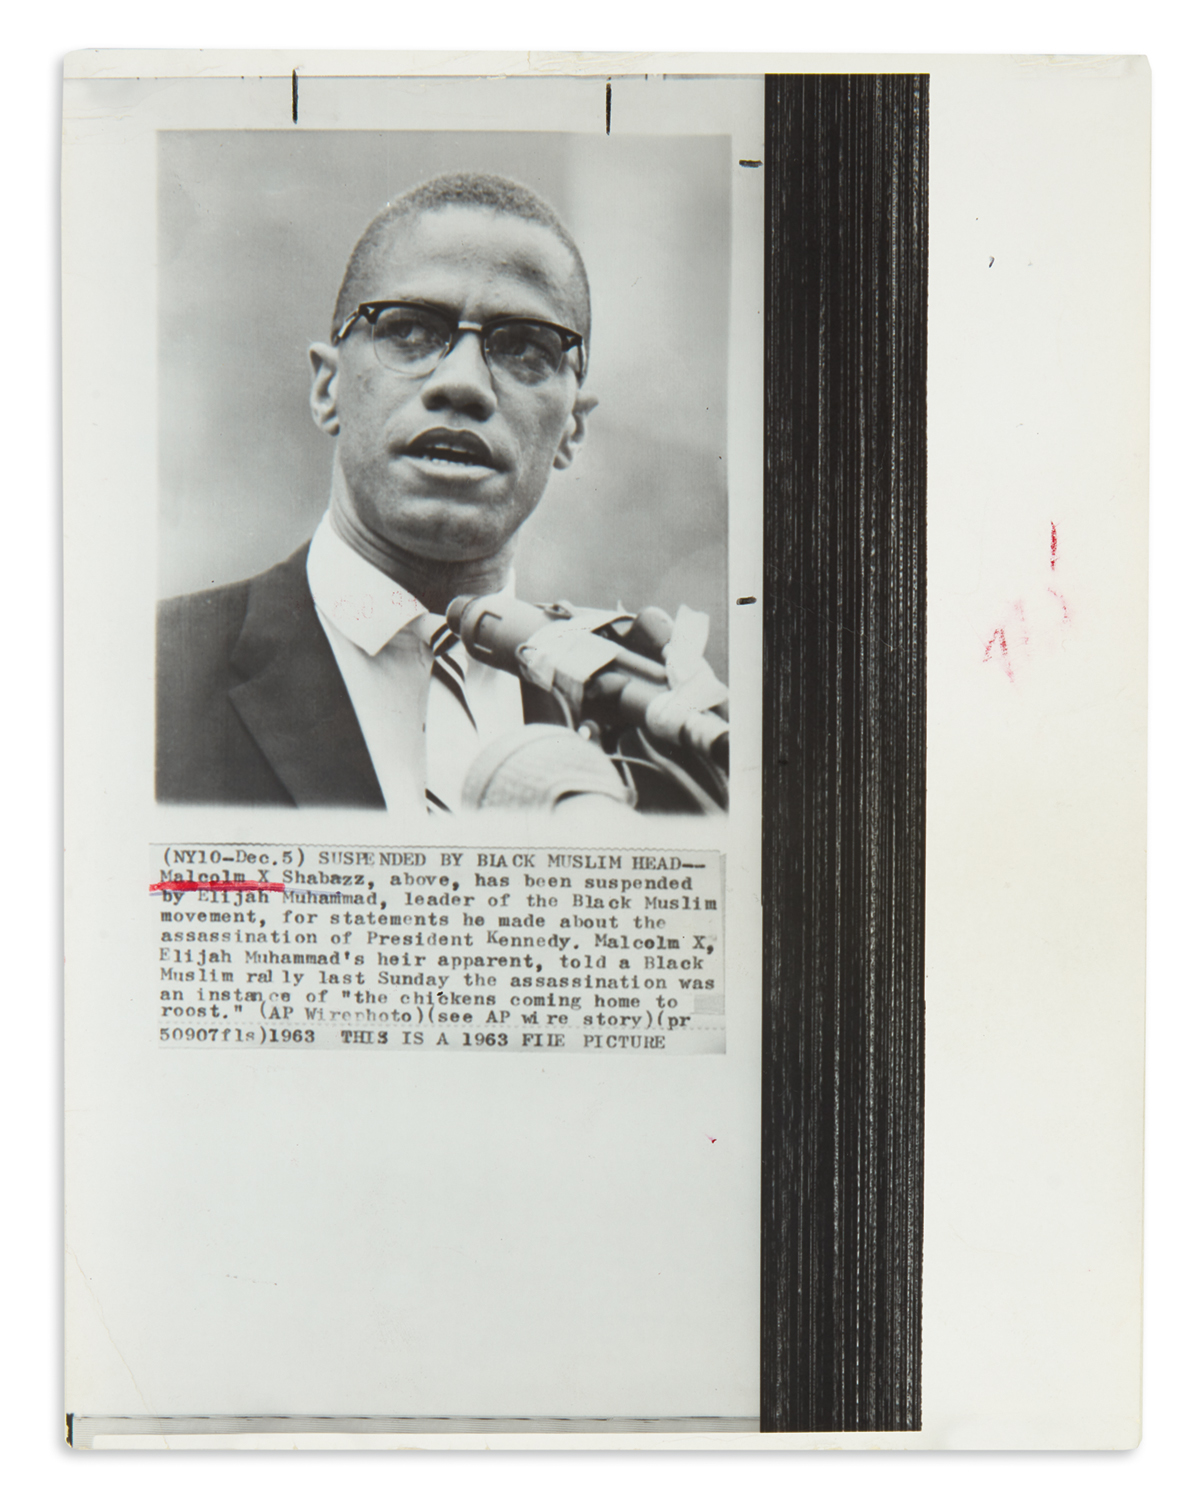 (MALCOLM X.) Press photograph of Malcolm X issued after his controversial comments on the Kennedy assassination.